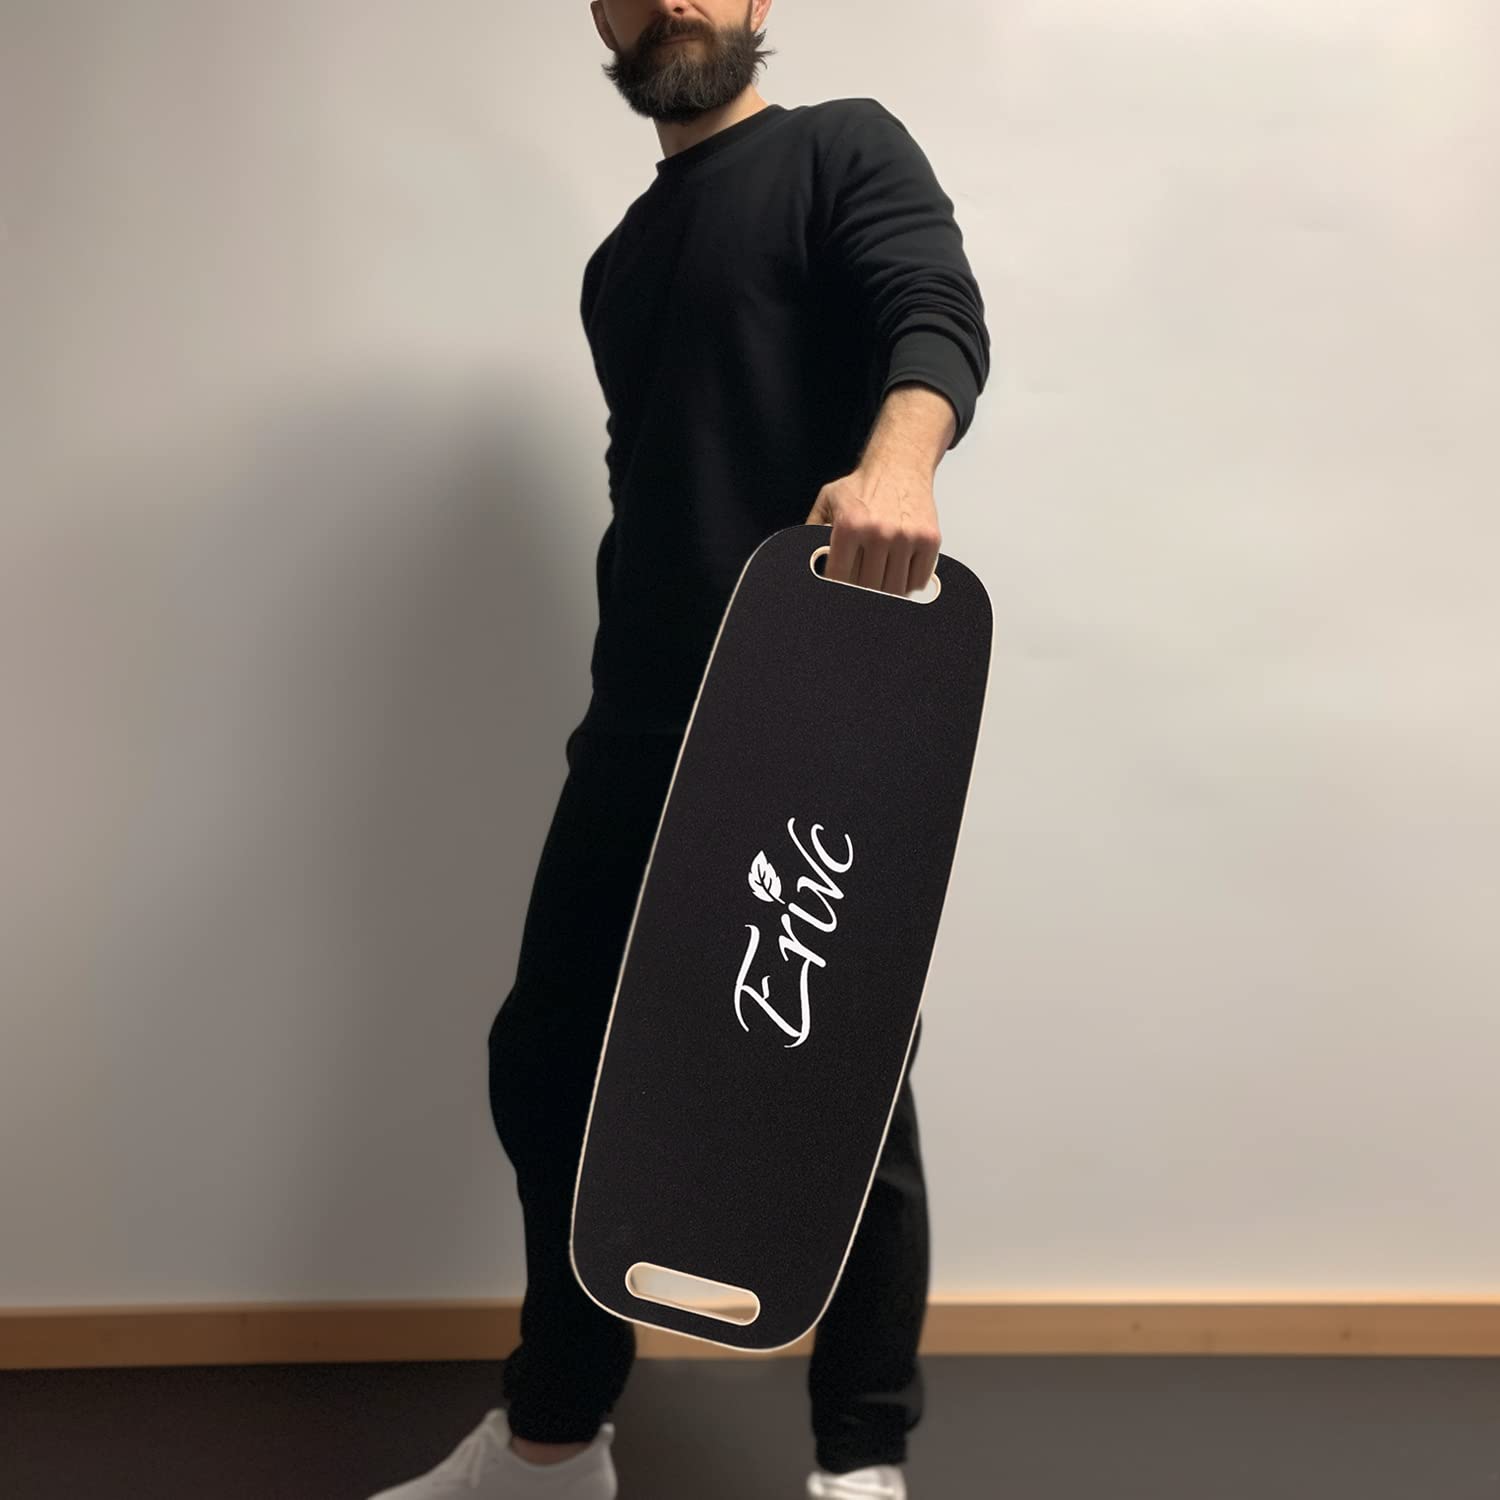 Erivc Premium Portable Surf Balance Board Trainer with Adjustable Stoppers - 3 Different Distance Options for Improve Core Strength and Balance Control